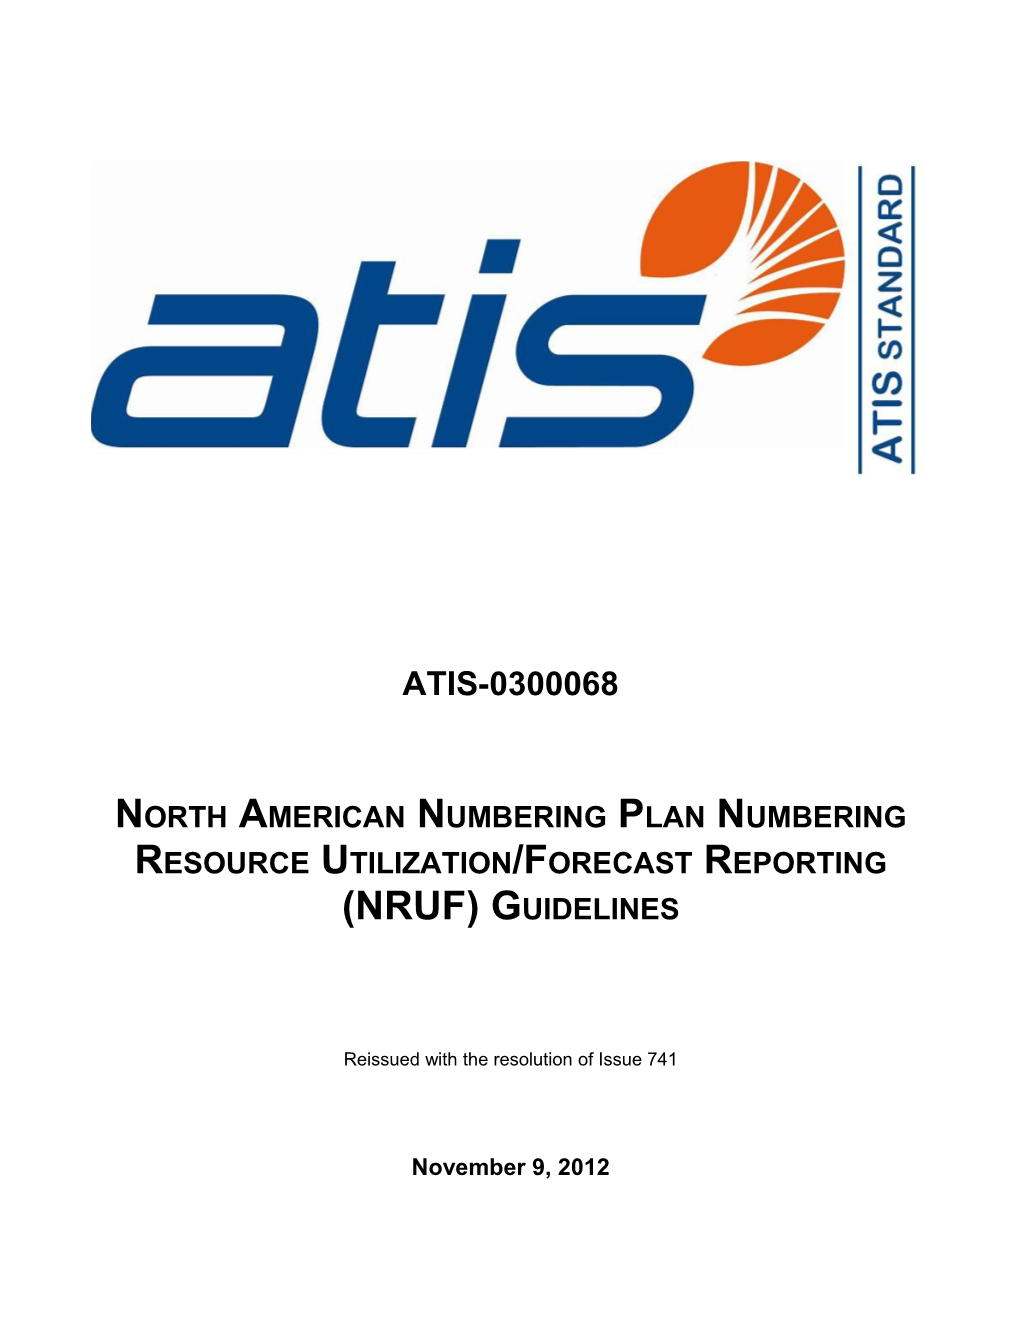 North American Numbering Plan Numbering Resource Utilization/Forecast Reporting (NRUF)